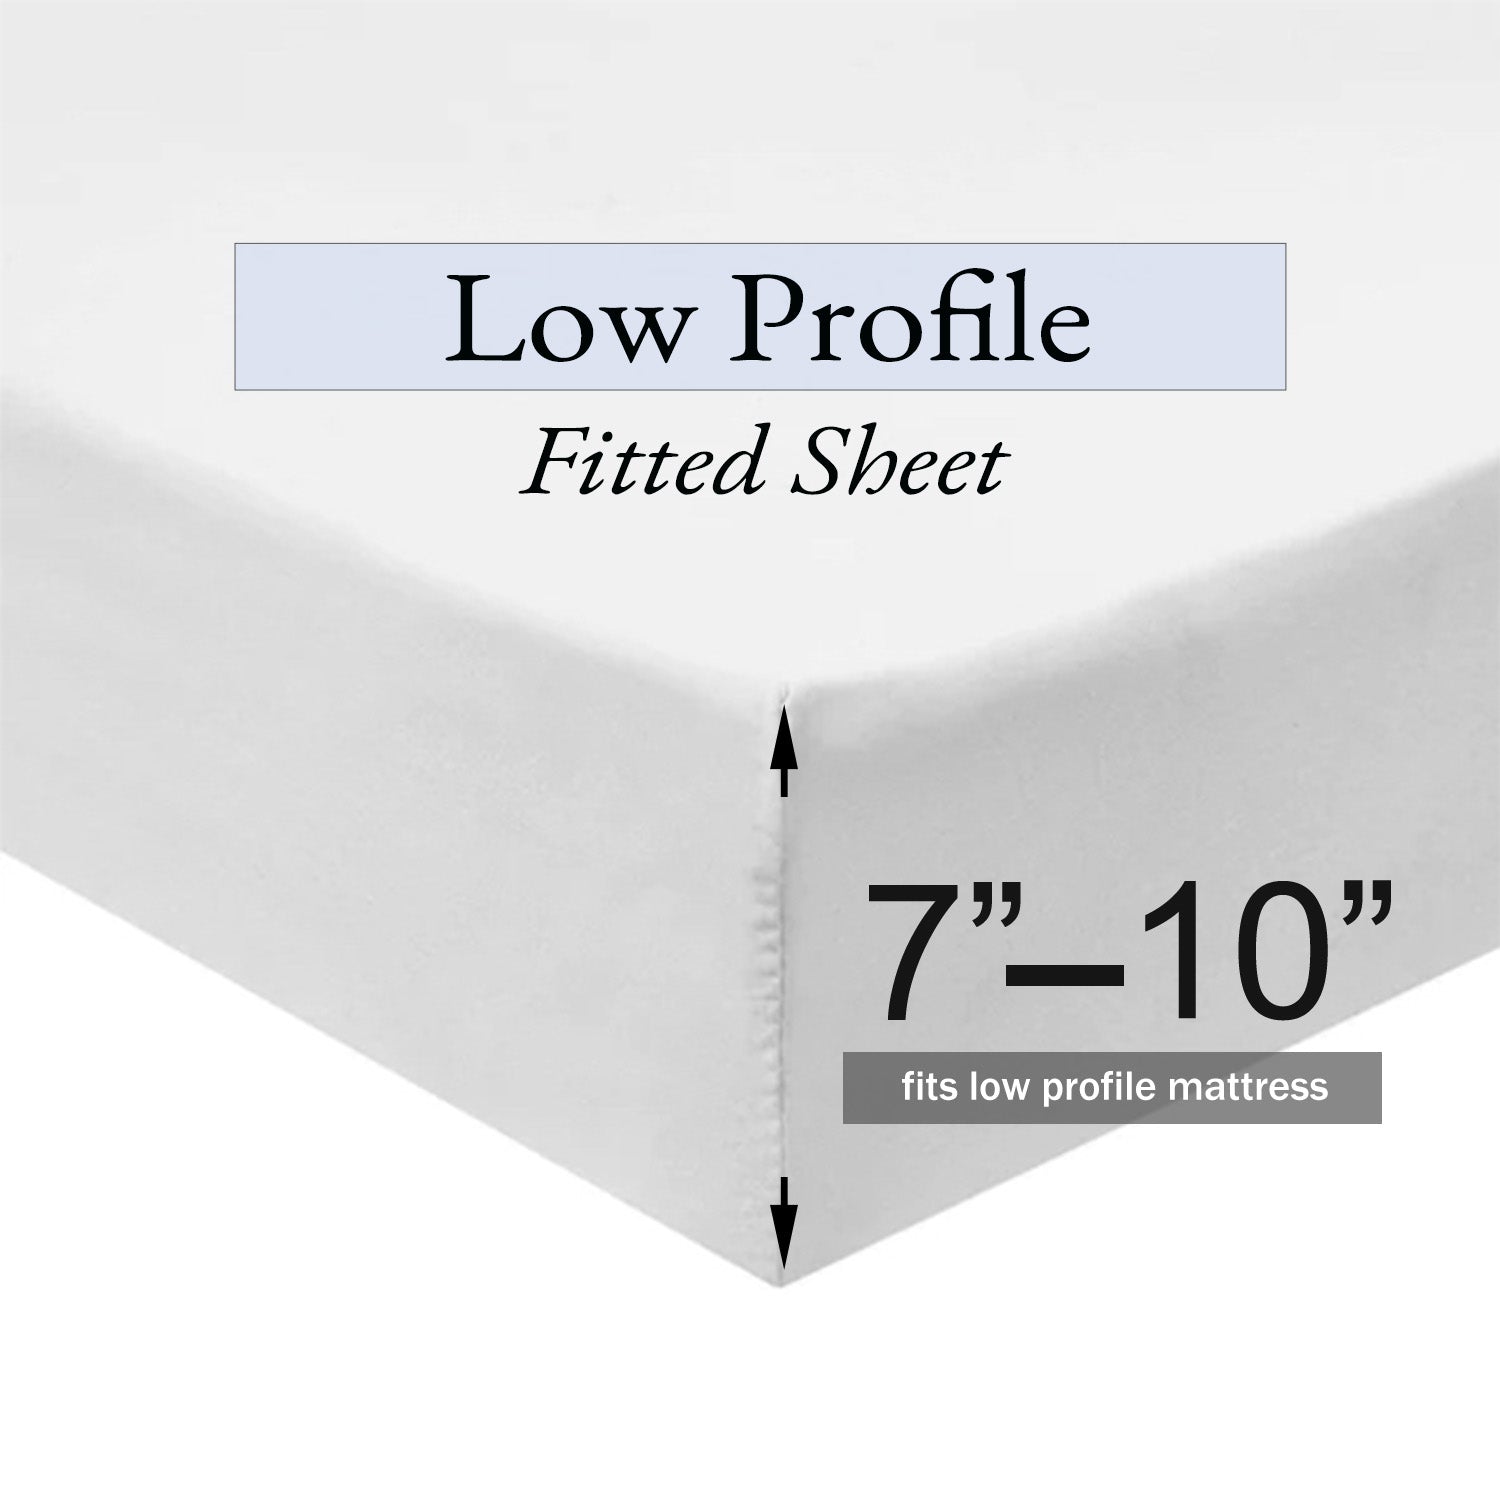 Low Profile Fitted Sheet (7-10 Inches) 100% Cotton Sateen Made in USA